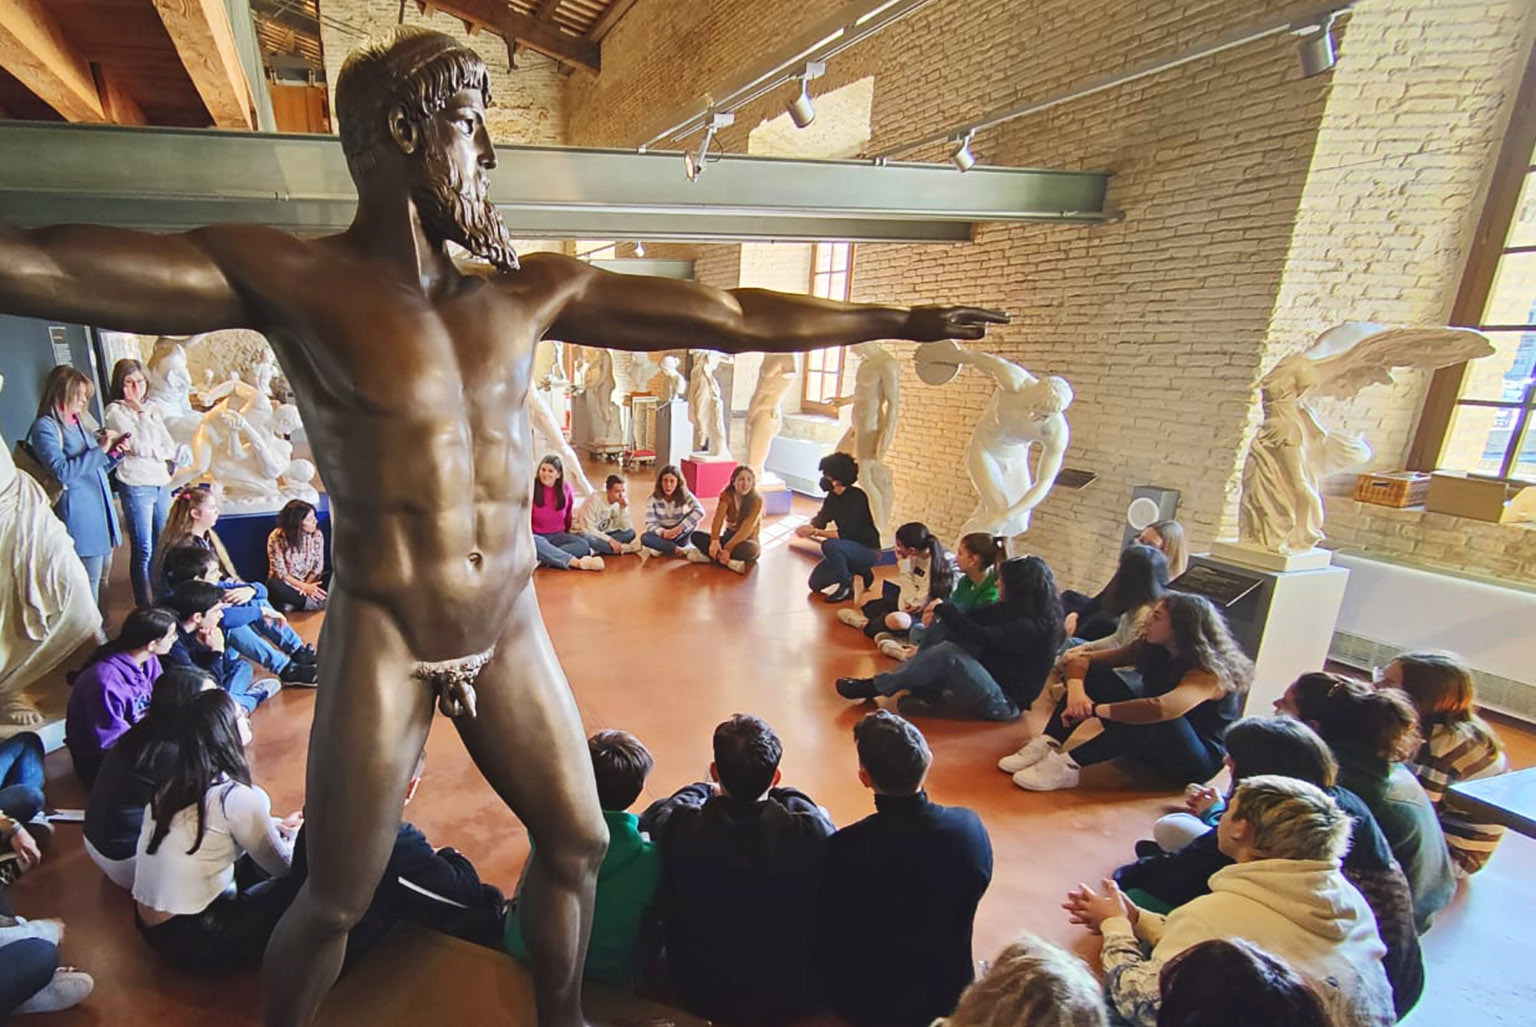 A group of young people sitting in a circle on the floor in the first room of the Museum. In the foreground, on the left, is the statue of Poseidon.